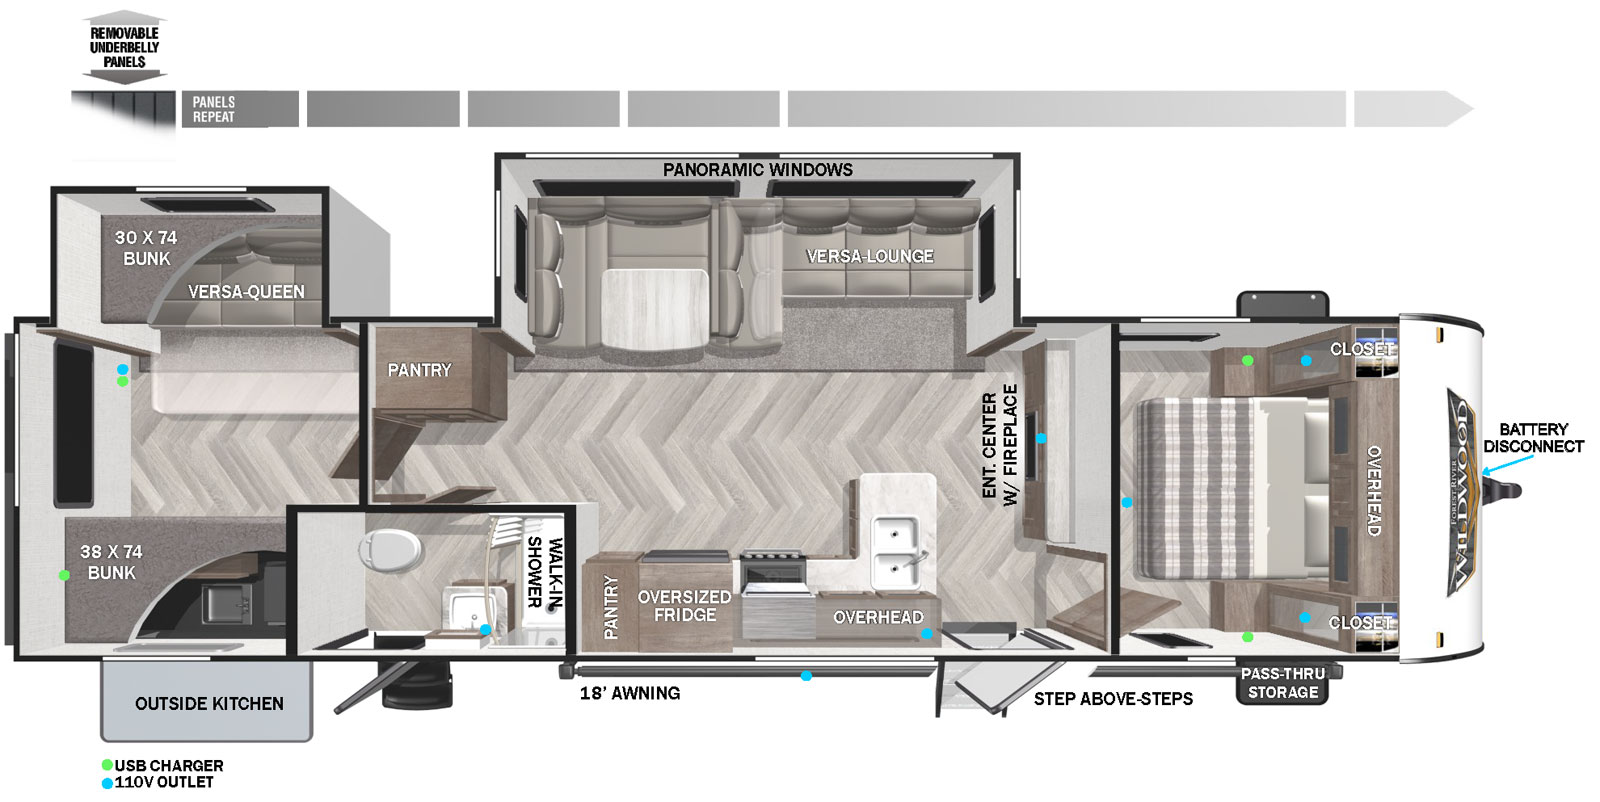 The 32BHDS floorplan features a back bunk house. The outside features an 18 foot electric power awning. The entrance leads right into the entertainment center. The entertainment center features an electric fireplace, soundbar, and TV backer prepped to mount a TV if desired. In the slide out is the Versa-Lounge and dinette. The Versa-Lounge allows for an eight foot chaise lounge or traditional U-dinette and sofa. On the opposing side, camp side, is the kitchen. The kitchen features an refrigerator, oven, microwave, sink, kitchen window, side pantry, and tons of cabinet storage. Right before the back is the pantry and bathroom. The bathroom includes a walk-in shower, toilet, sink, linen storage, and second entry. In the rear is the bunk house with two top bunks, entertainment center, and Versa-Queen. The Versa-Queen offers the option for a sofa, bunk, or queen bed. In the front, the bedroom features underbed storage, overhead storage, and side closets next to the front of the bed that have CPAP storage.